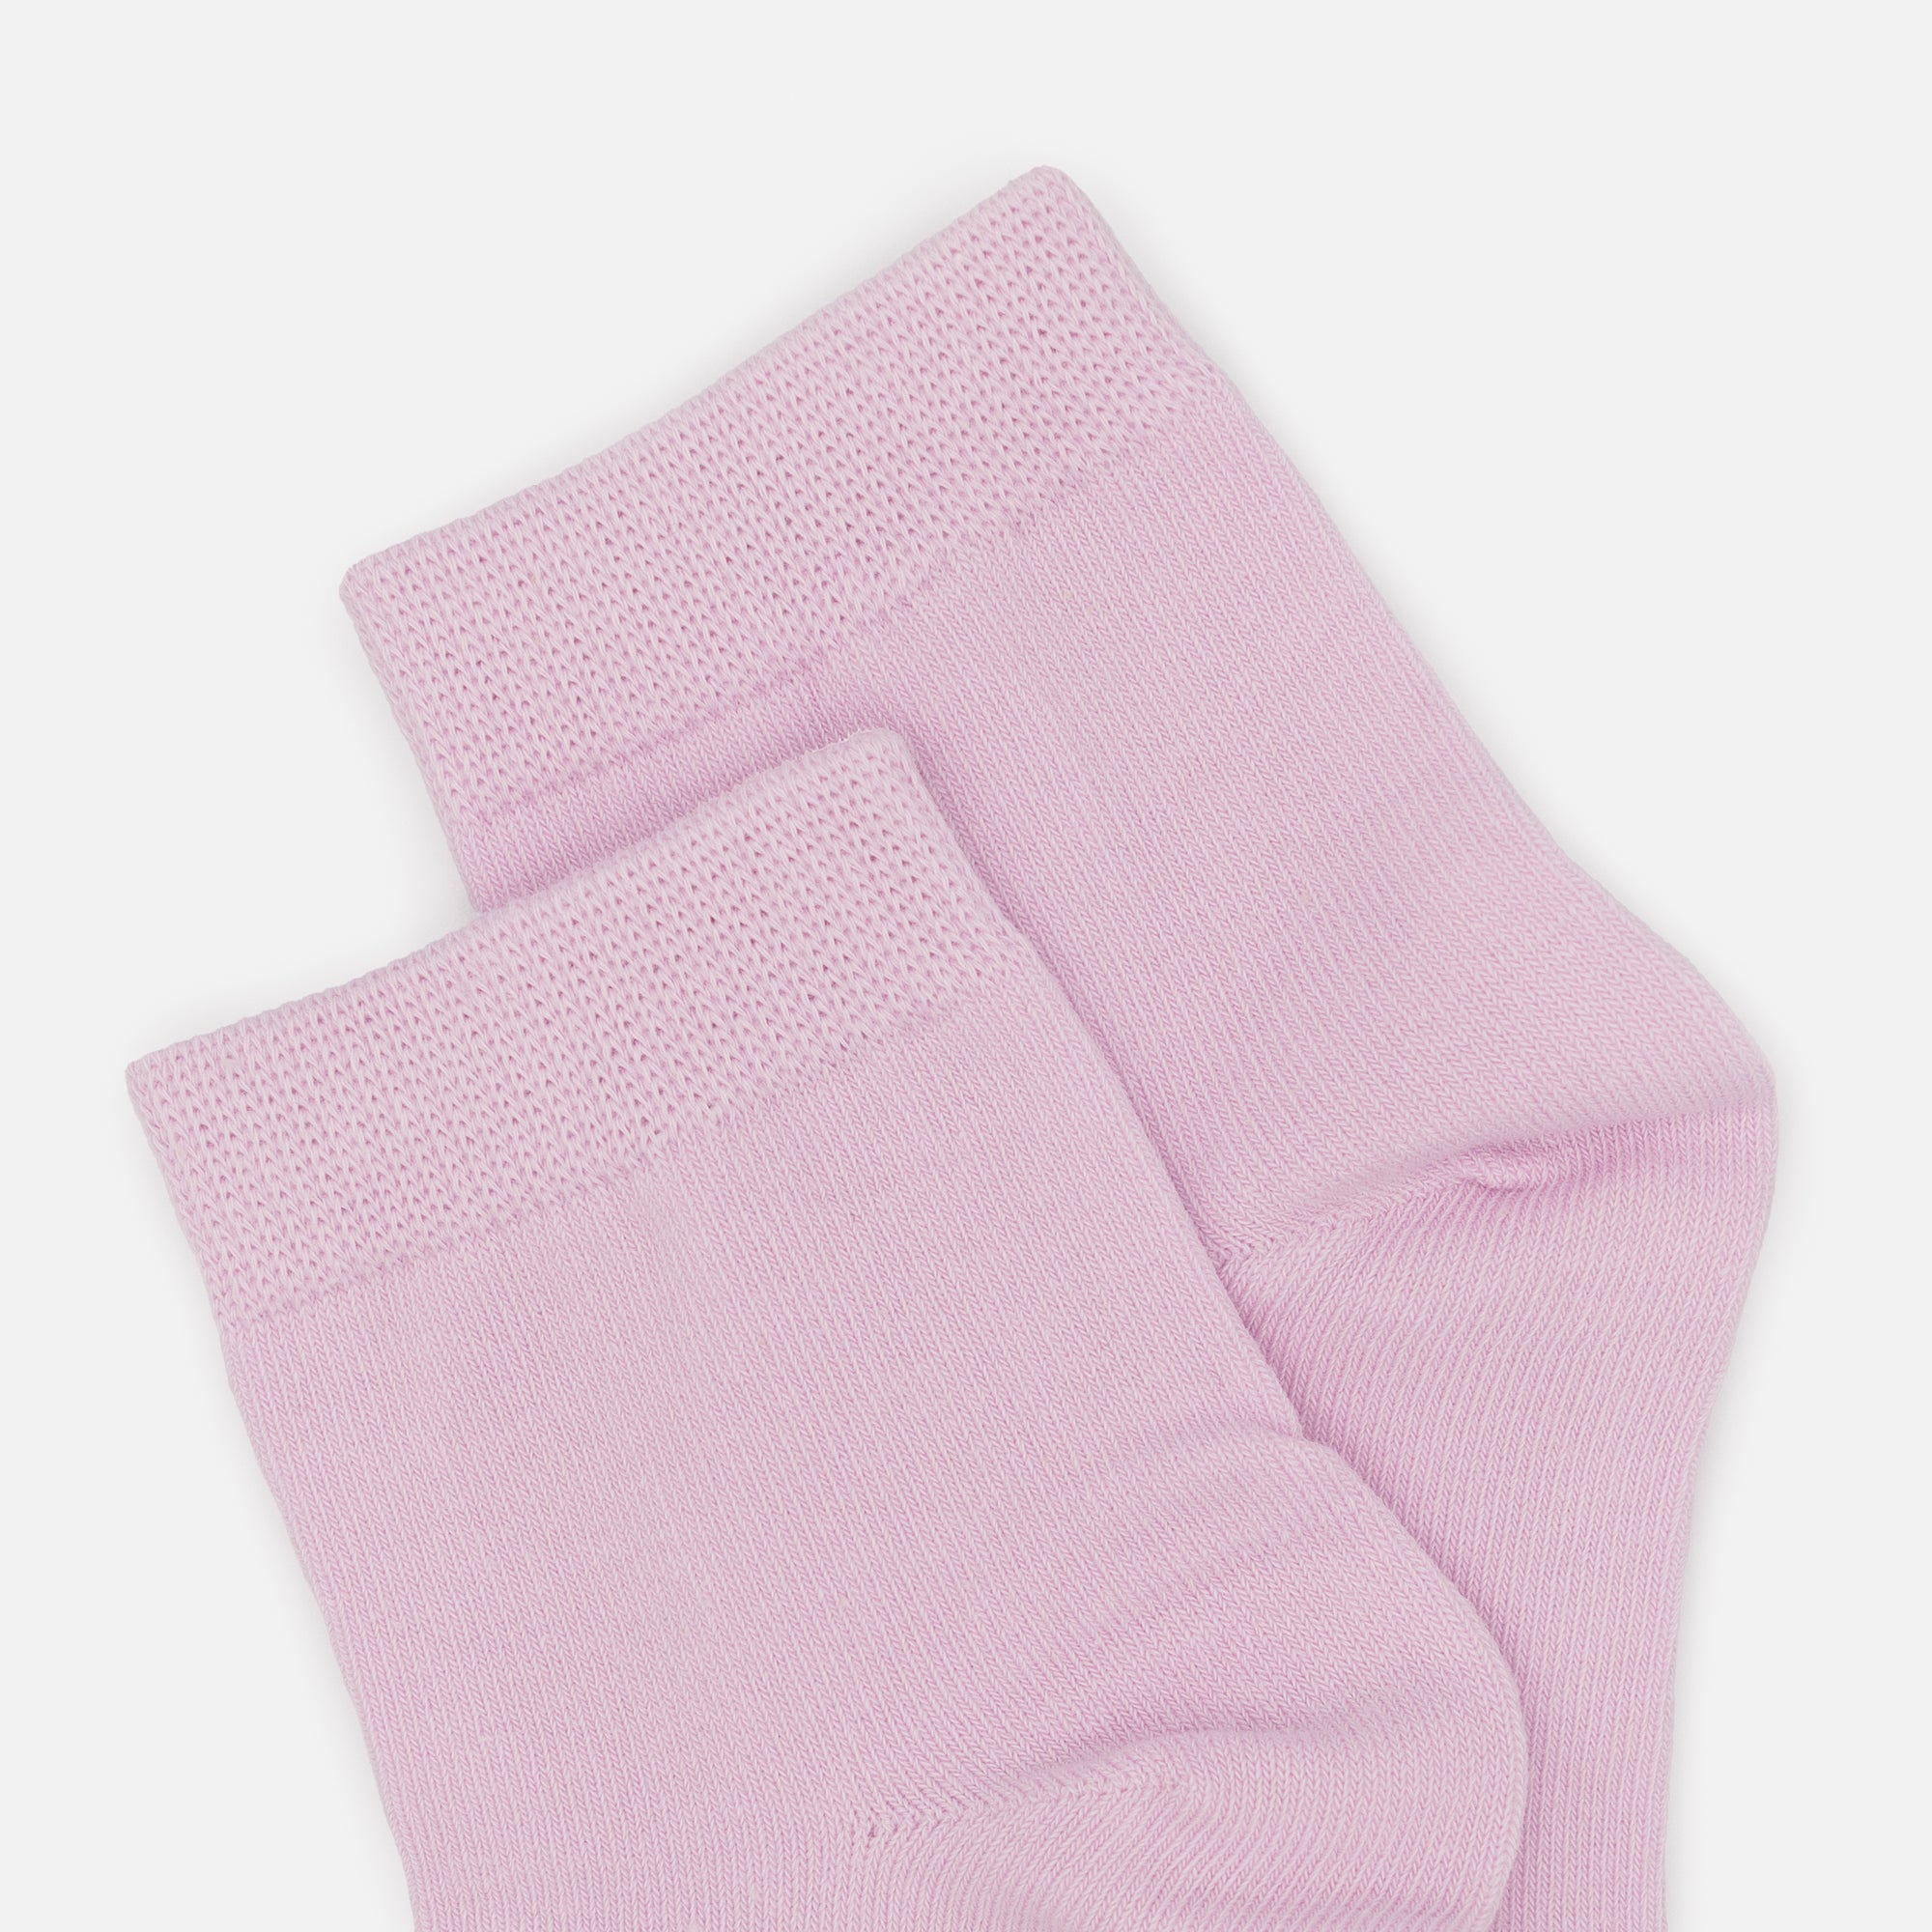 Mauve-pink mid-length stockings with band trim